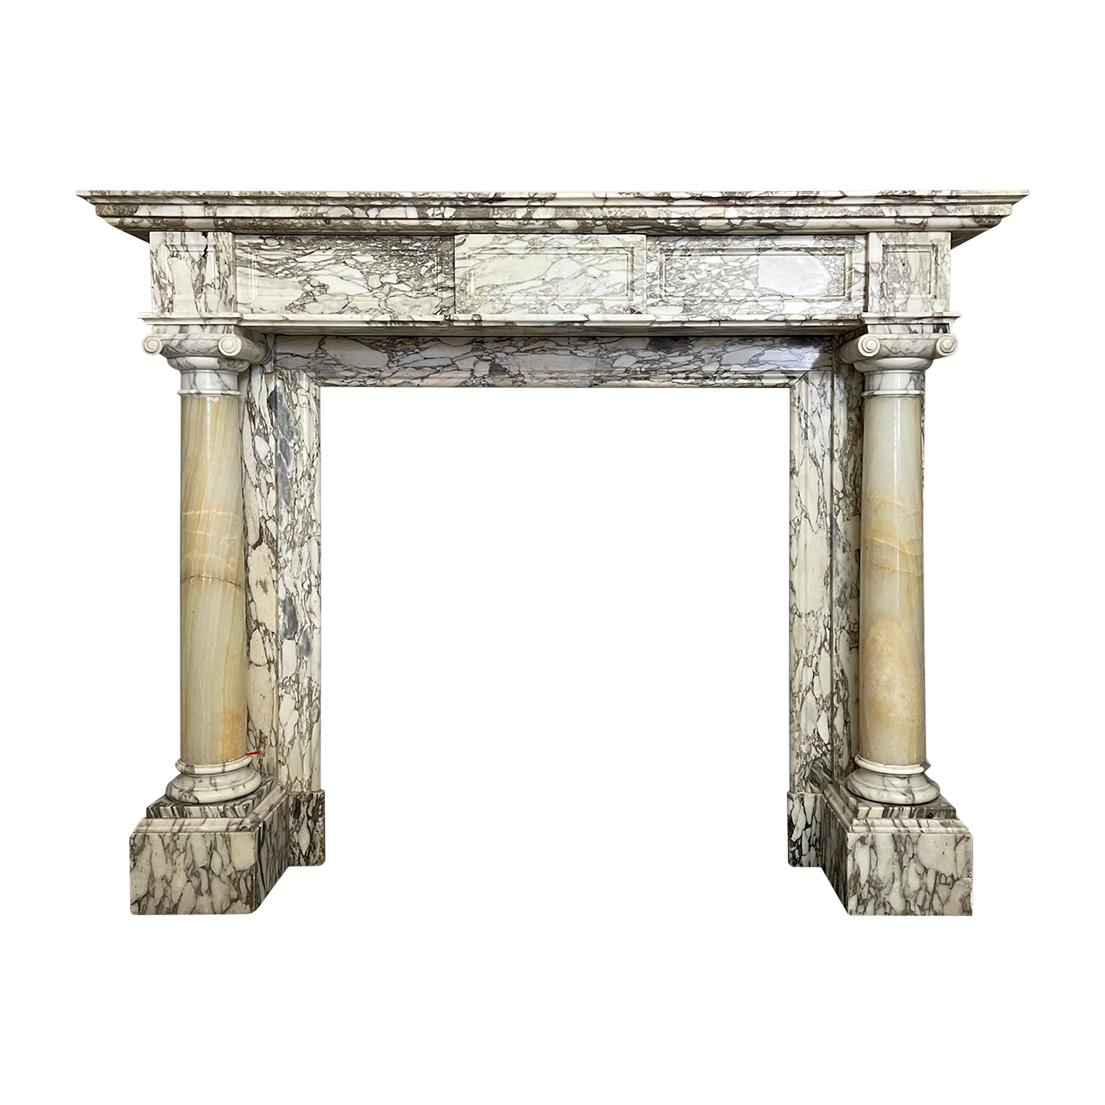 Antique French Columned Fireplace Mantel in Breche Marble